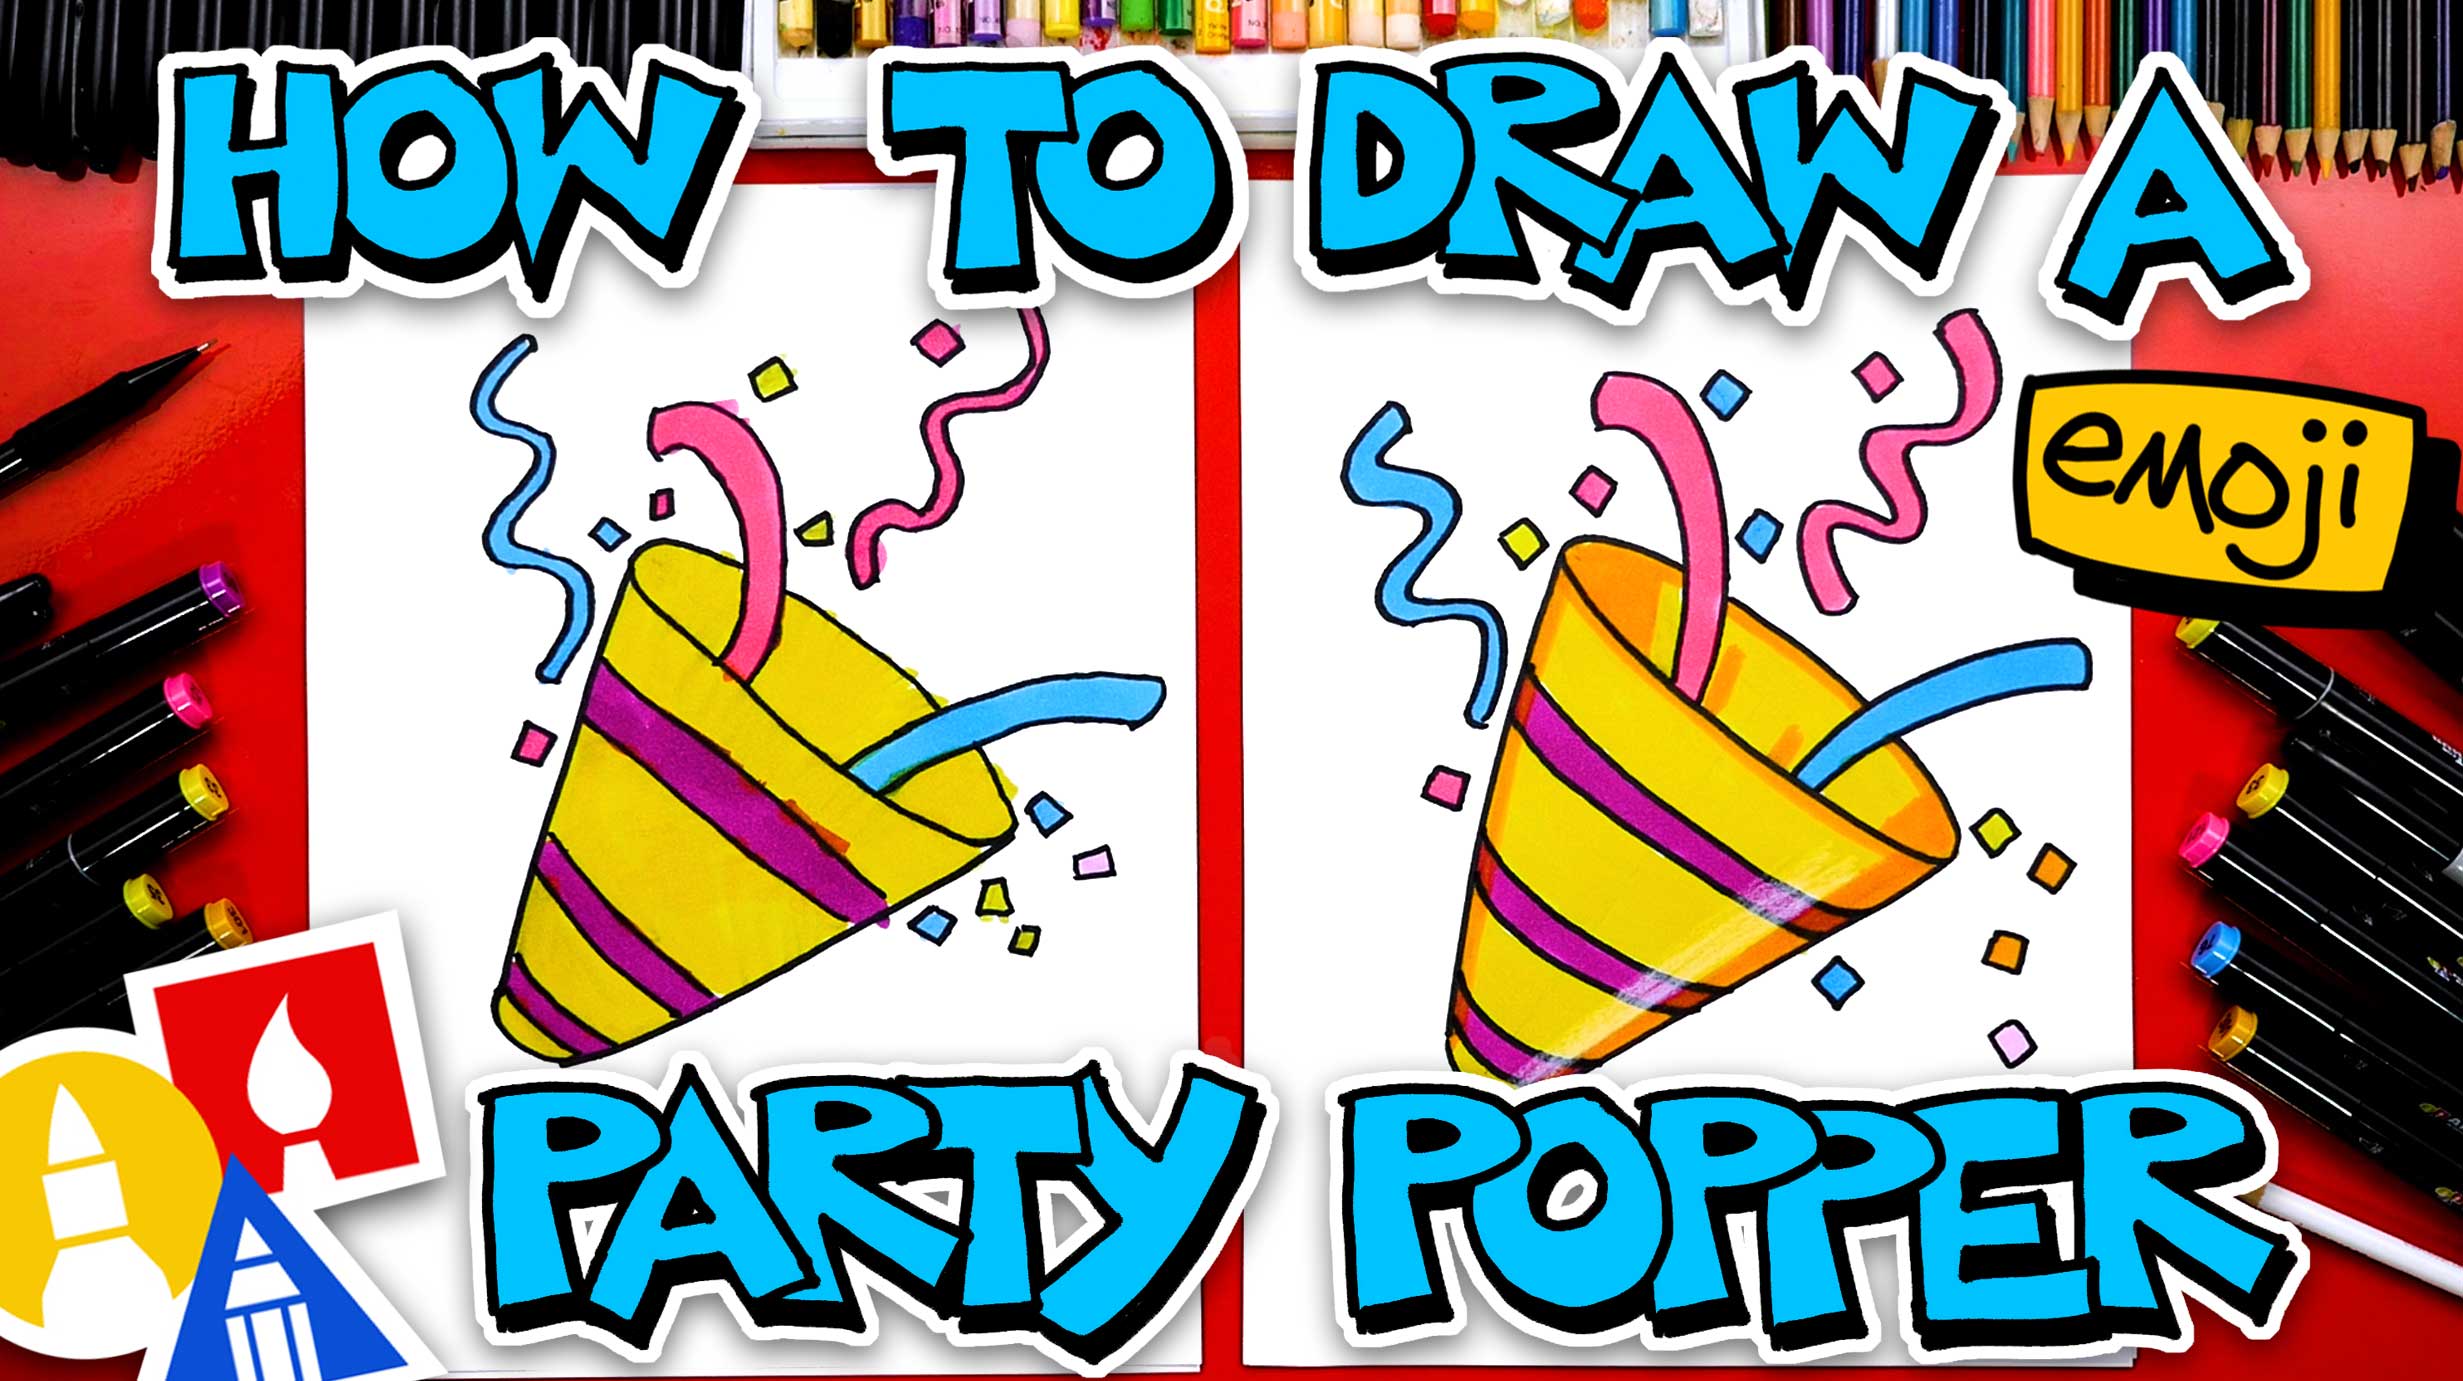 How To Draw A Party Popper Emoji Art For Kids Hub